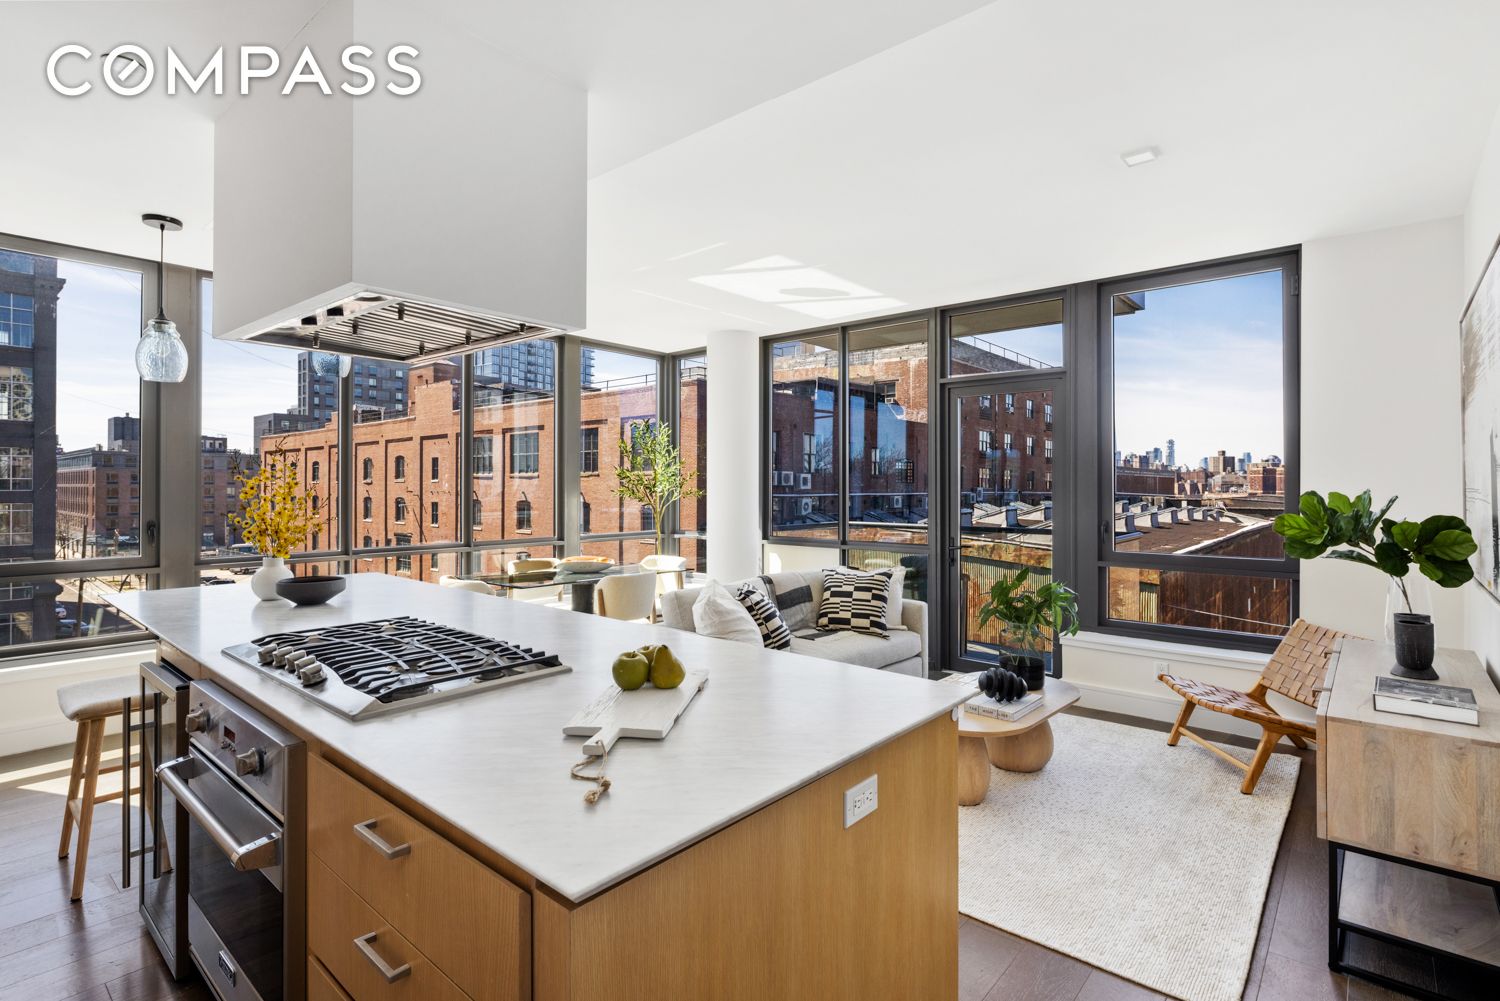 50 Greenpoint Avenue 5H, Greenpoint, Brooklyn, New York - 3 Bedrooms  
2 Bathrooms  
5 Rooms - 